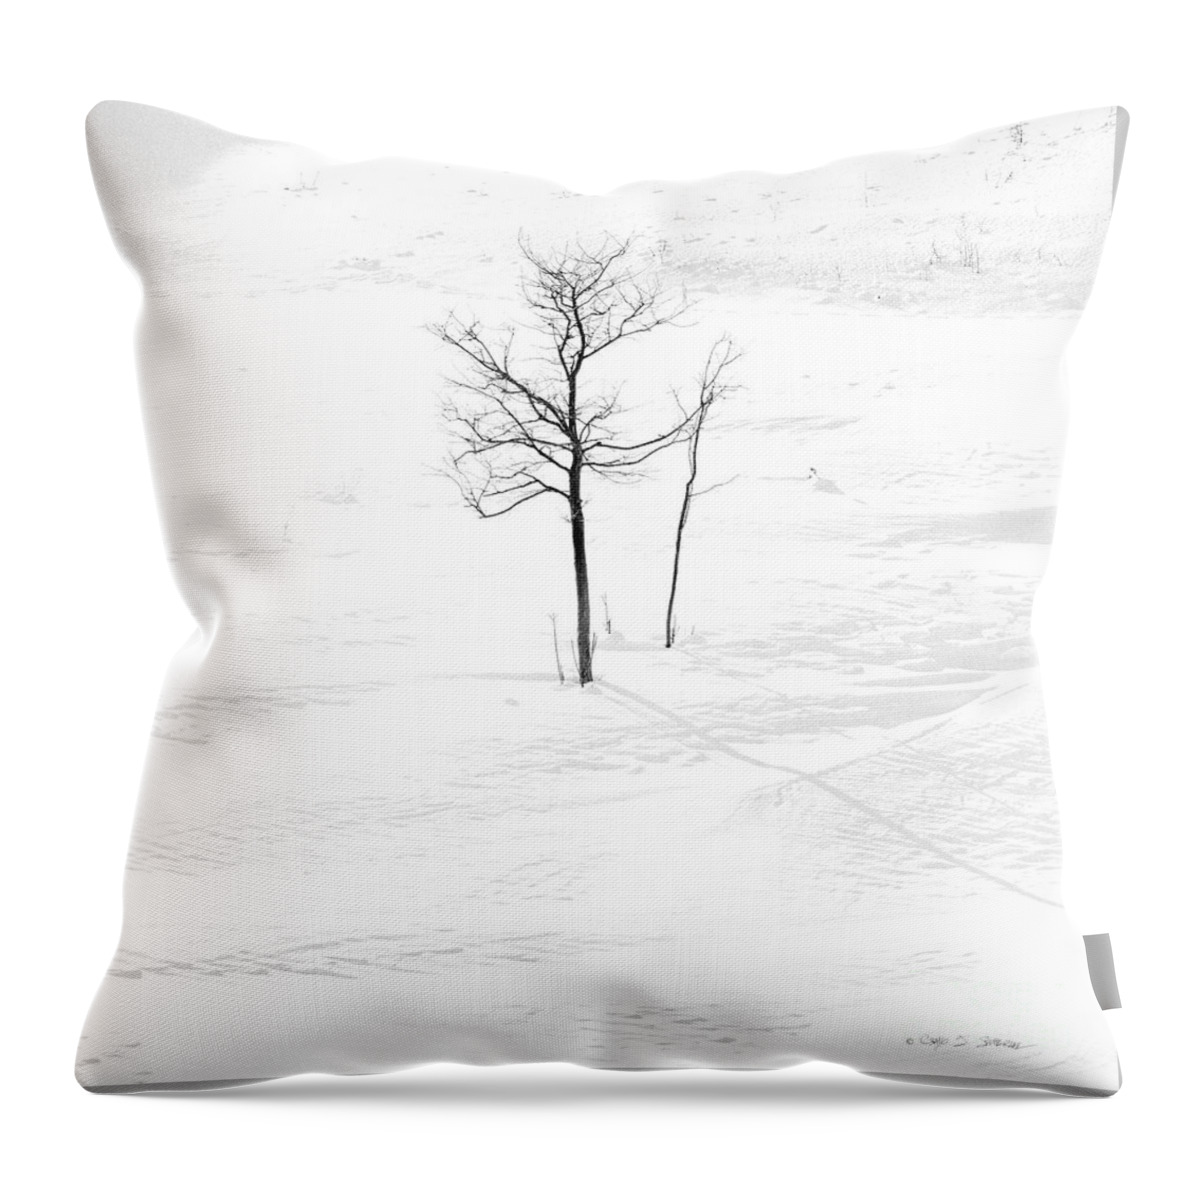 Landscape Throw Pillow featuring the photograph Lone Winter Tree by Craig J Satterlee